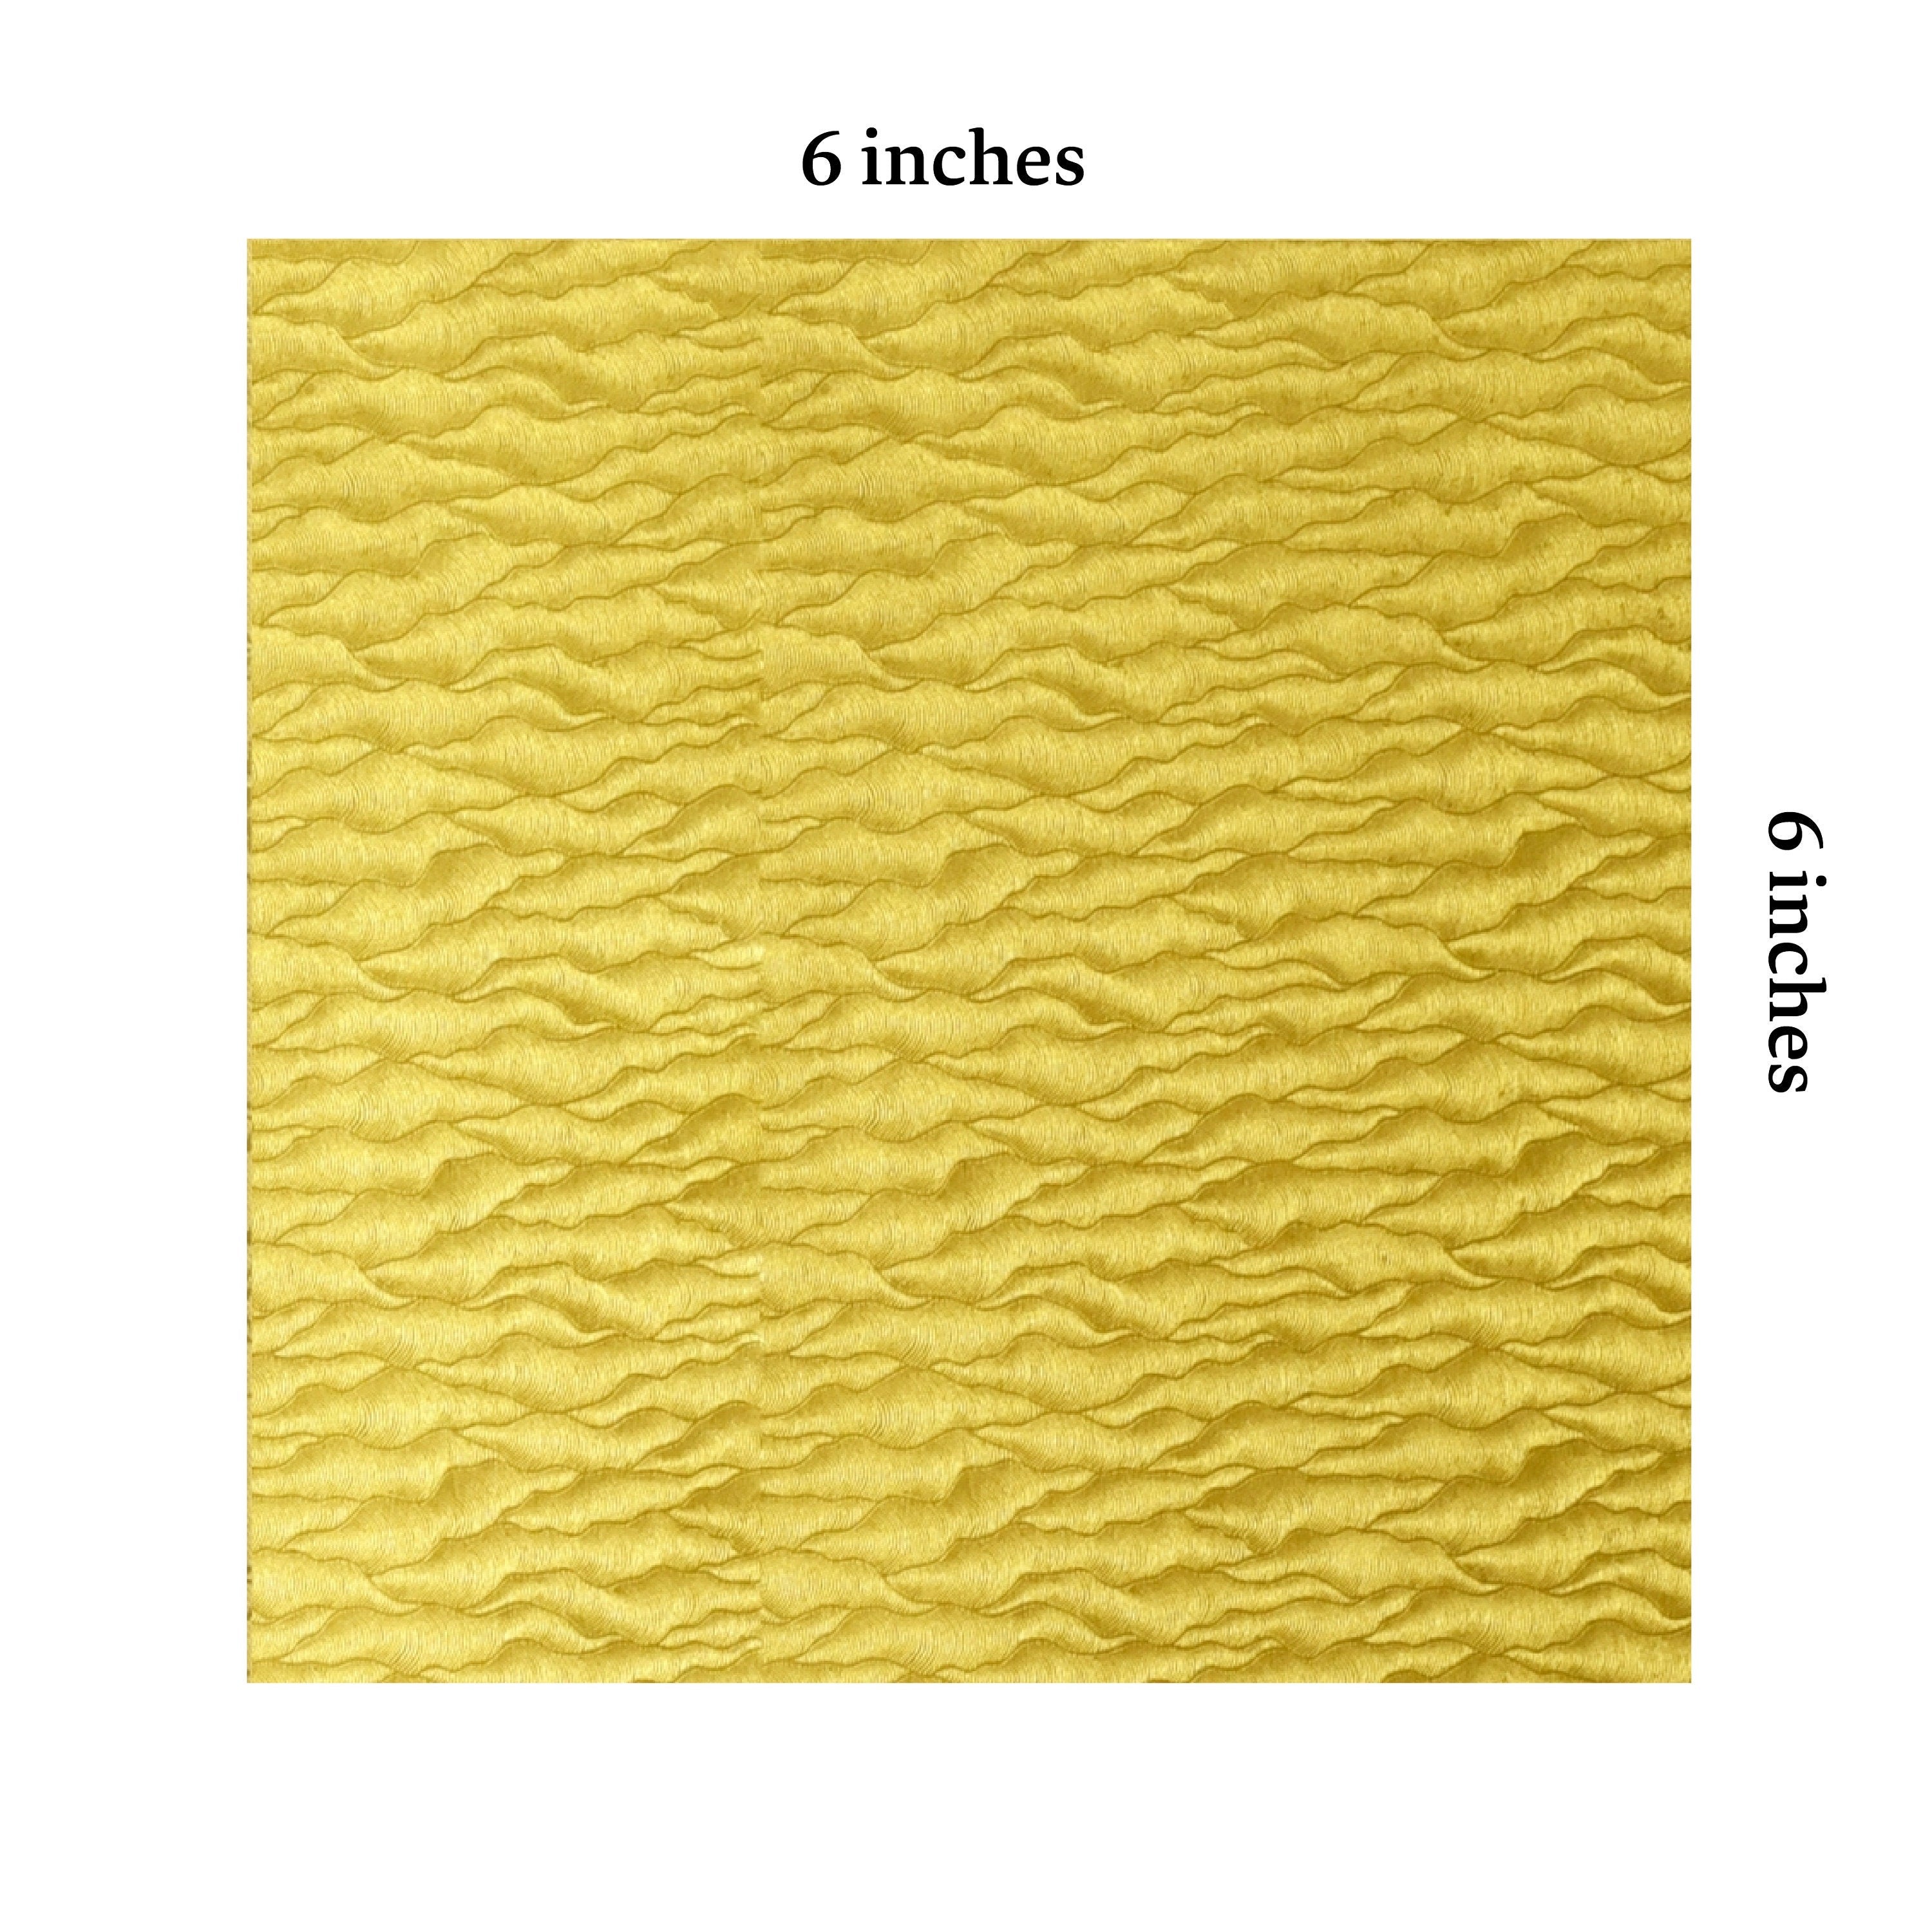 100 Gold Origami Paper Sheets Pack with cloudy 6x6 inches Folding Paper, Origami Cranes, Paper Craft